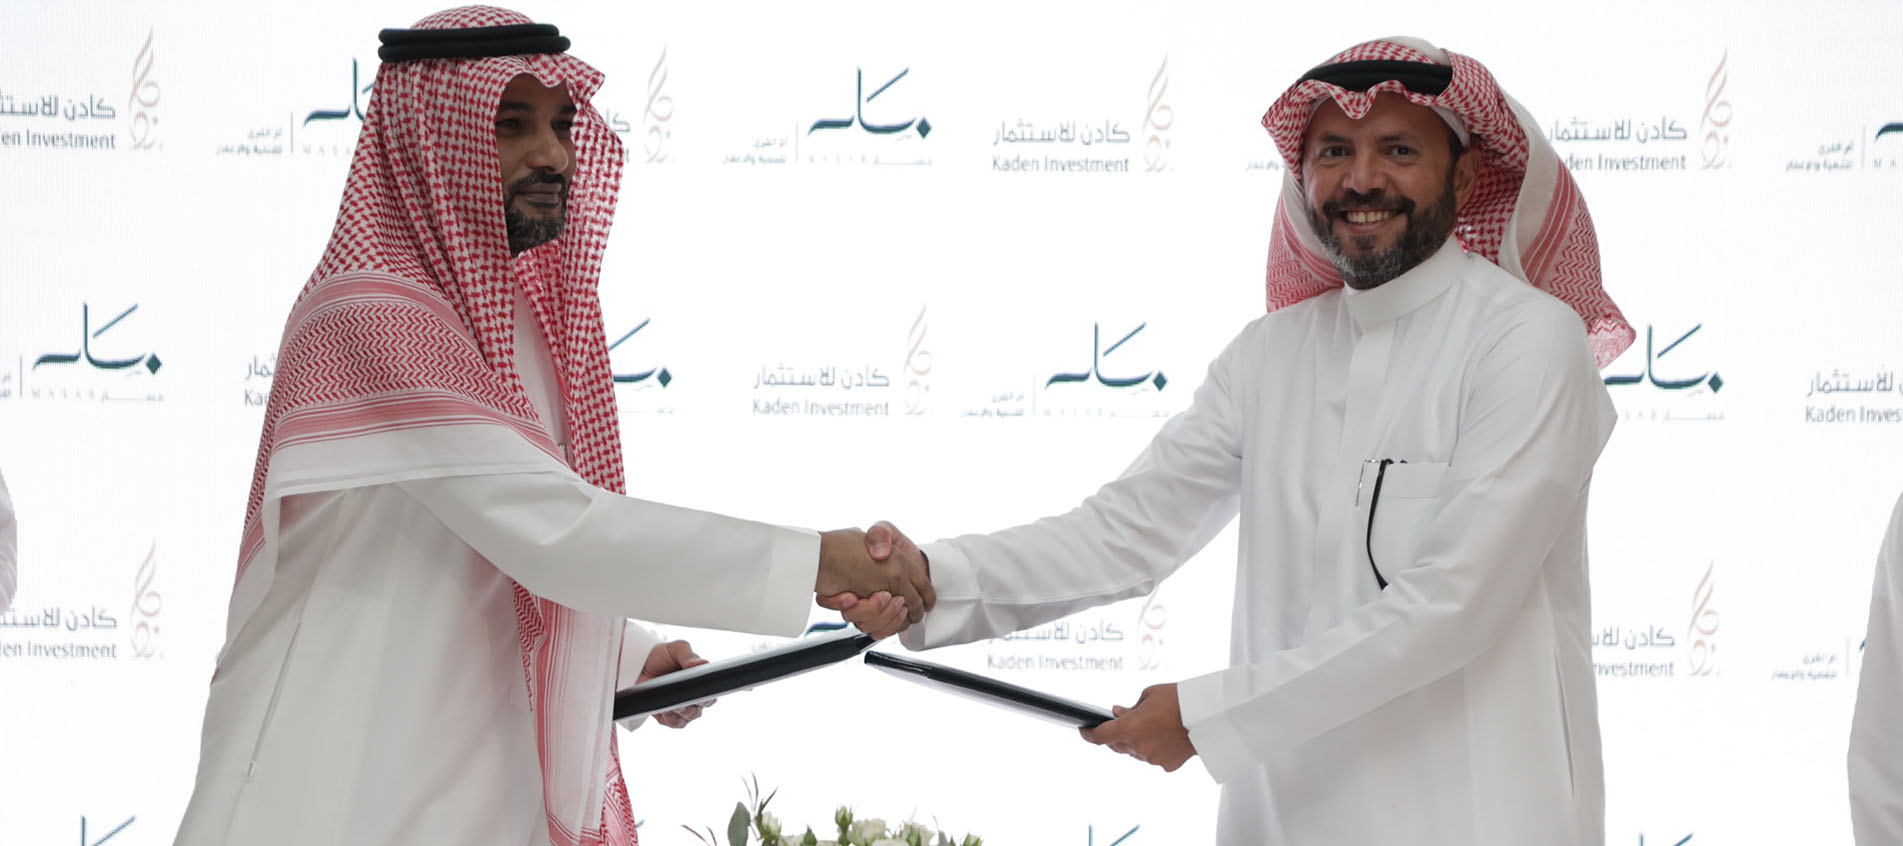 Kaden Investment Signs Strategic Partnership with Umm Alqura Company to develop and implement "Masar Destination" 